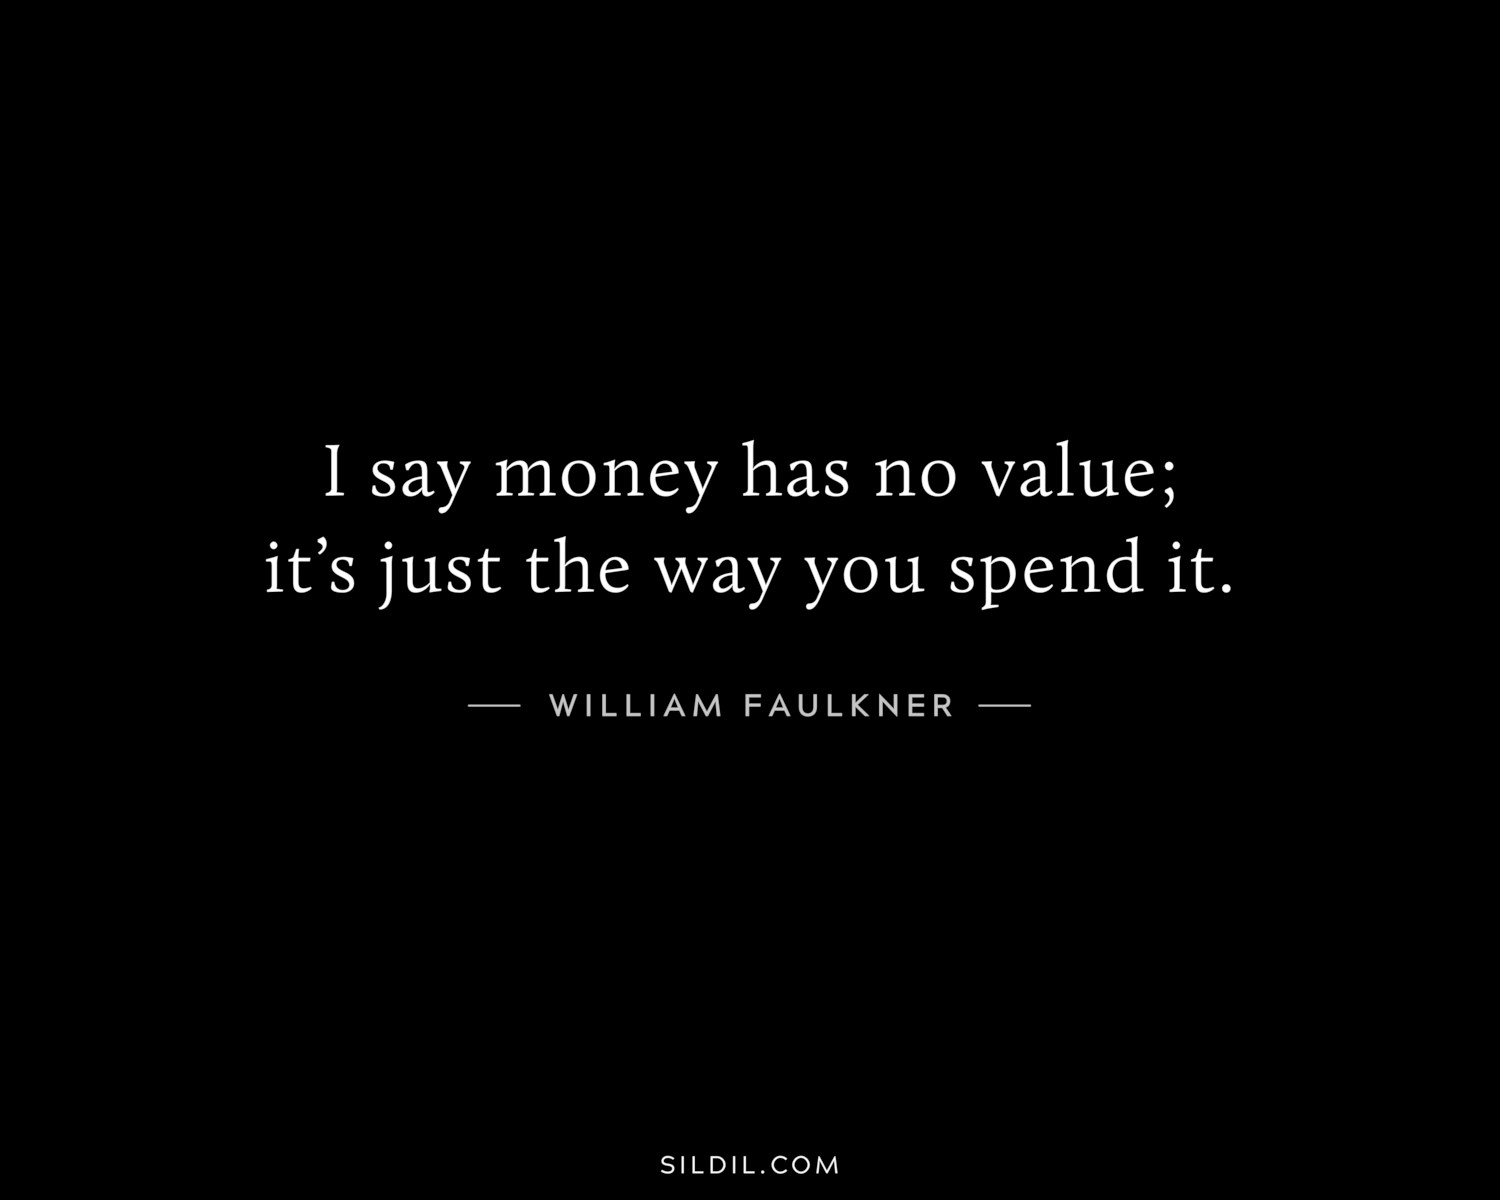 I say money has no value; it’s just the way you spend it.